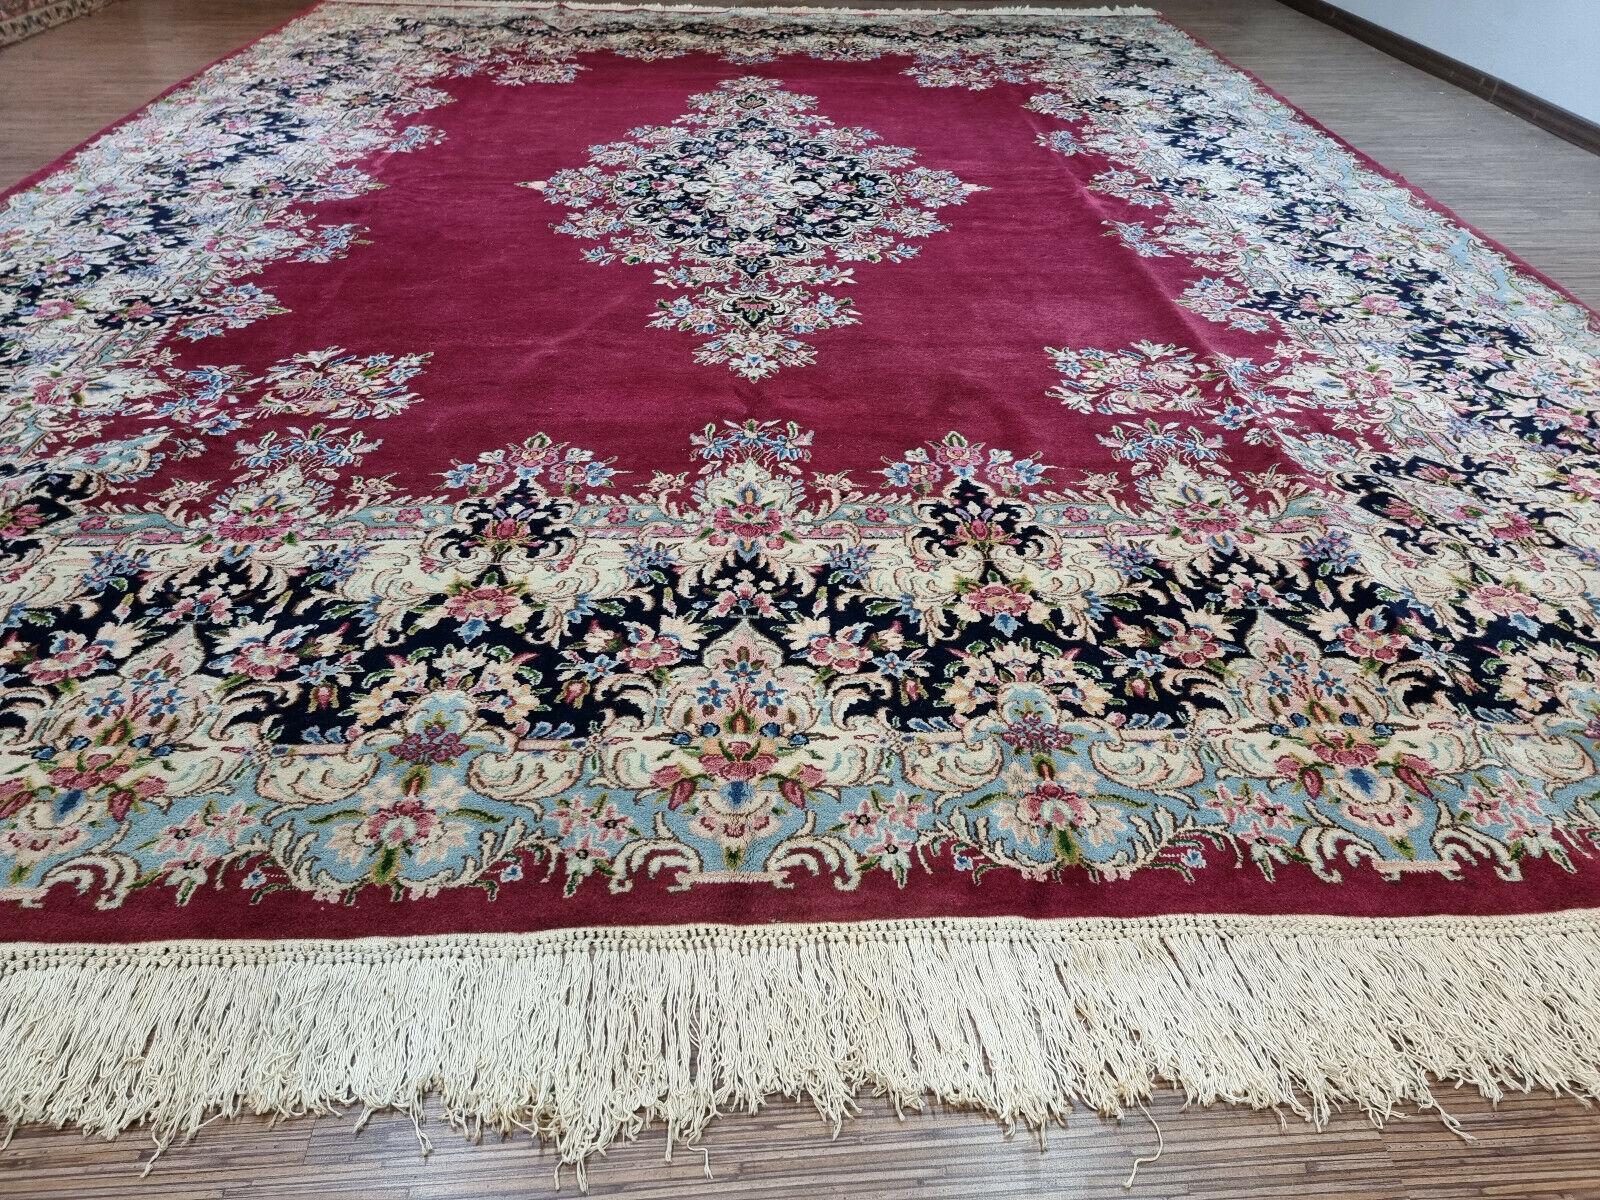 Hand-Knotted Handmade Vintage Persian Style Kerman Rug 10.1' x 13.1', 1970s - 1D73 For Sale